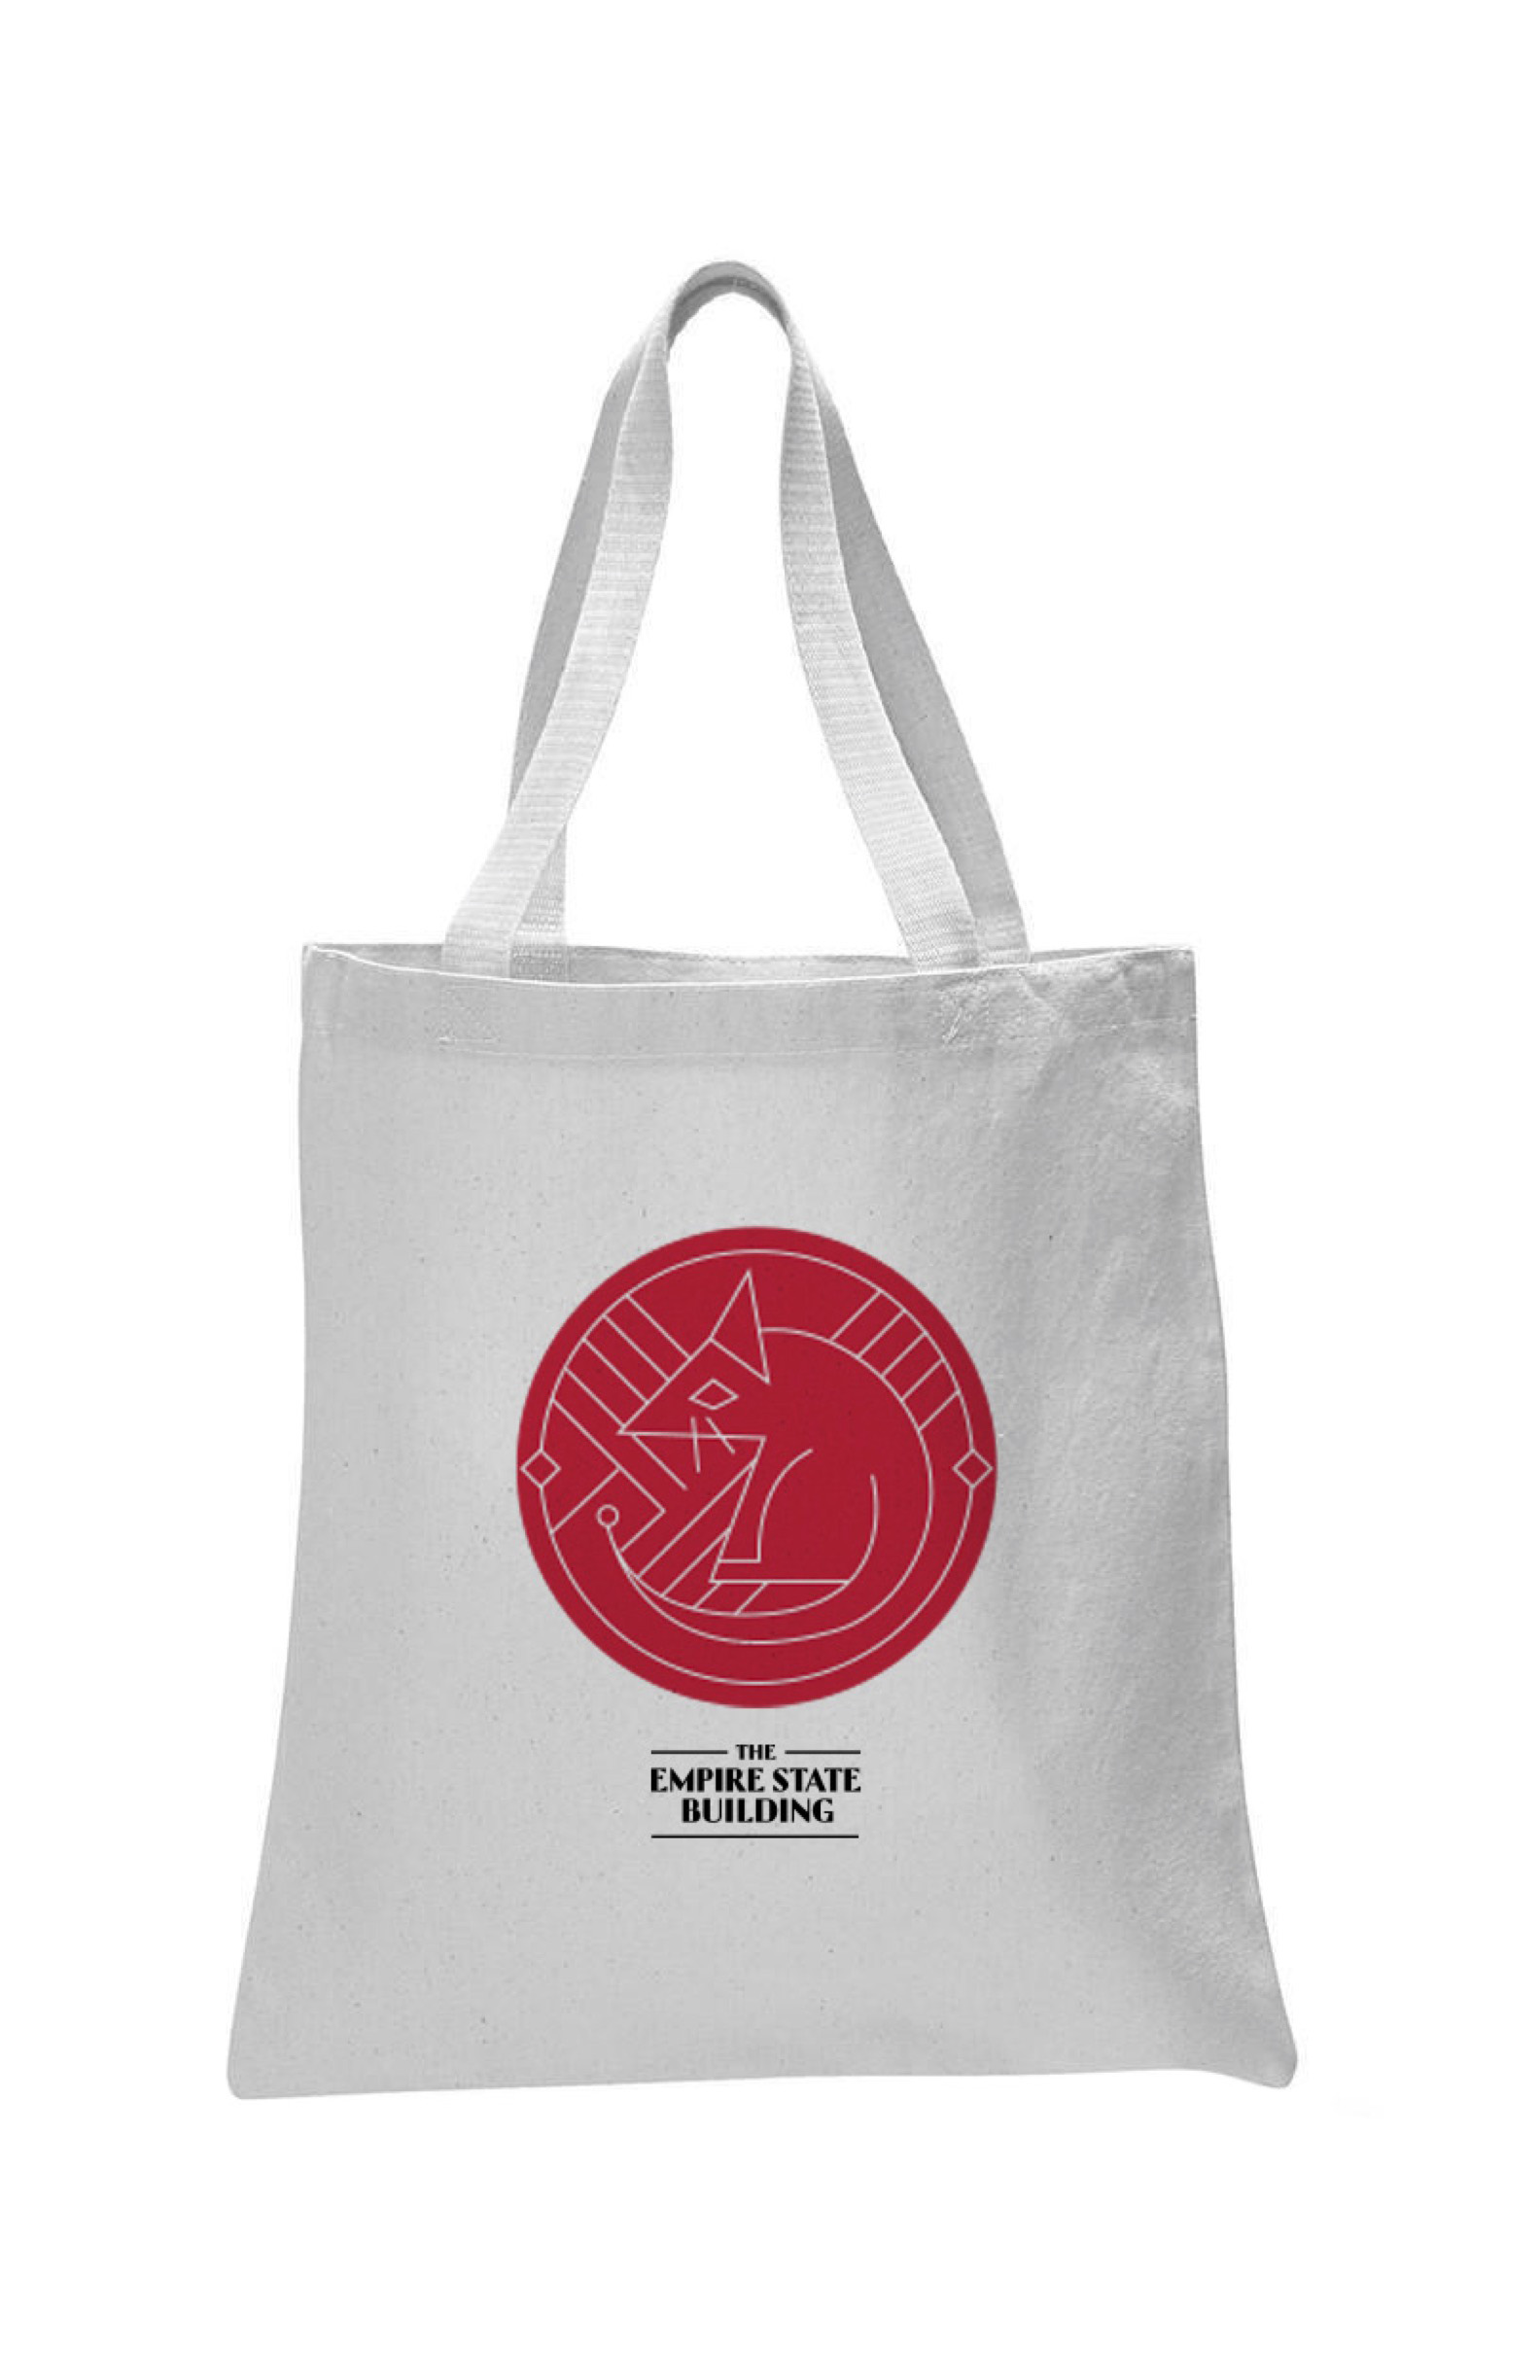 Chinese Tote Bad